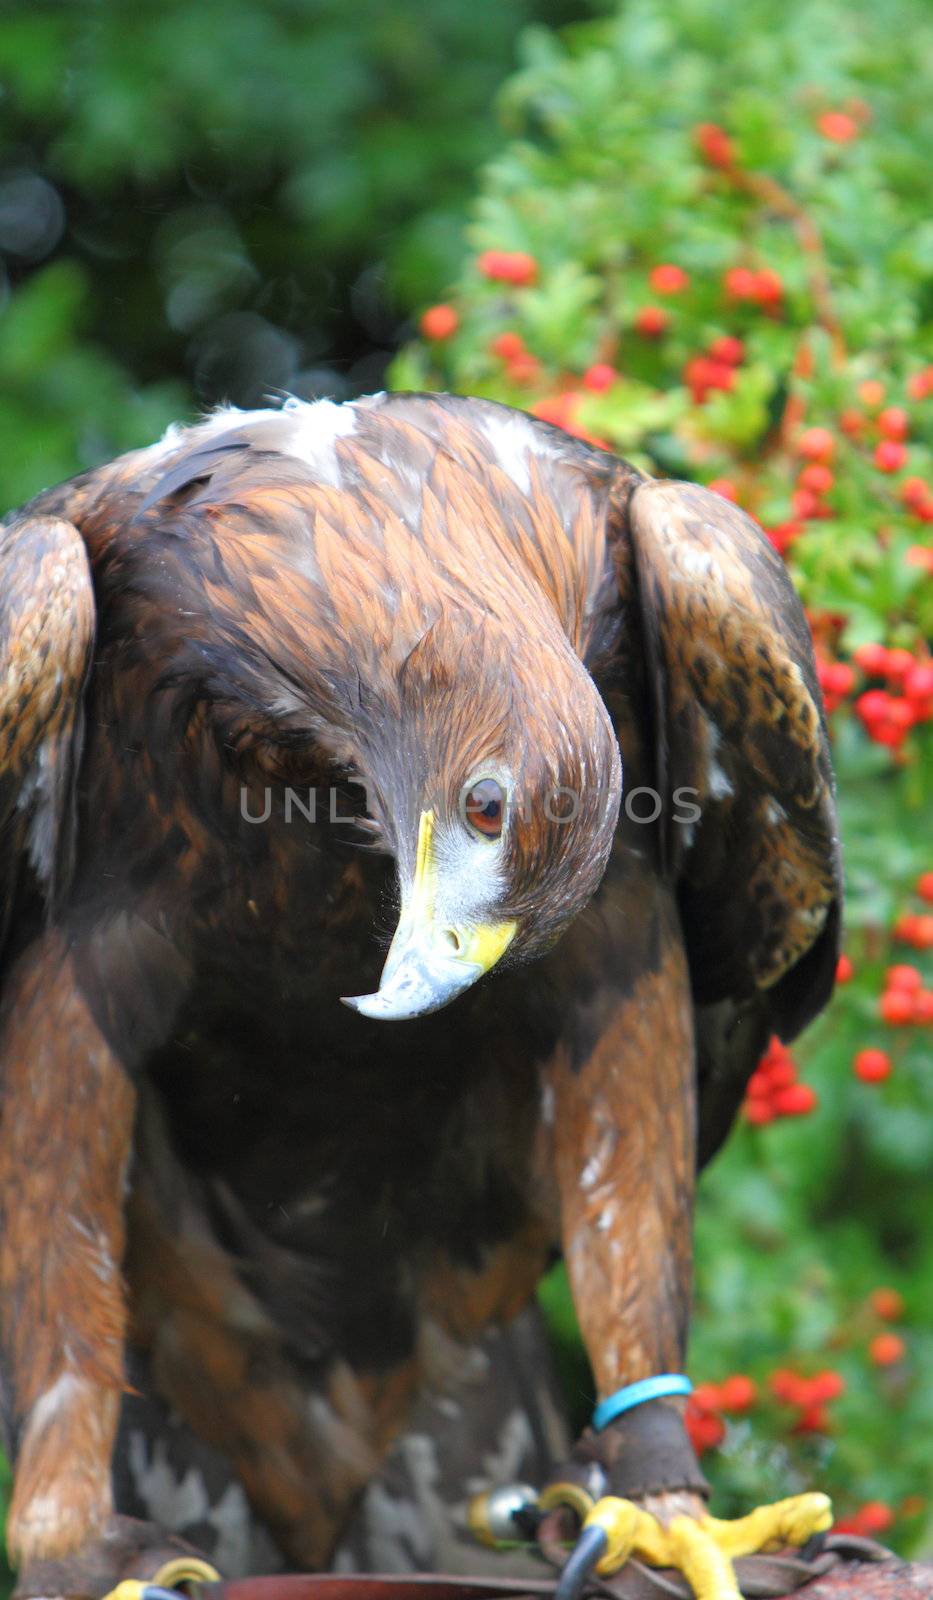 Golden eagle looking curious